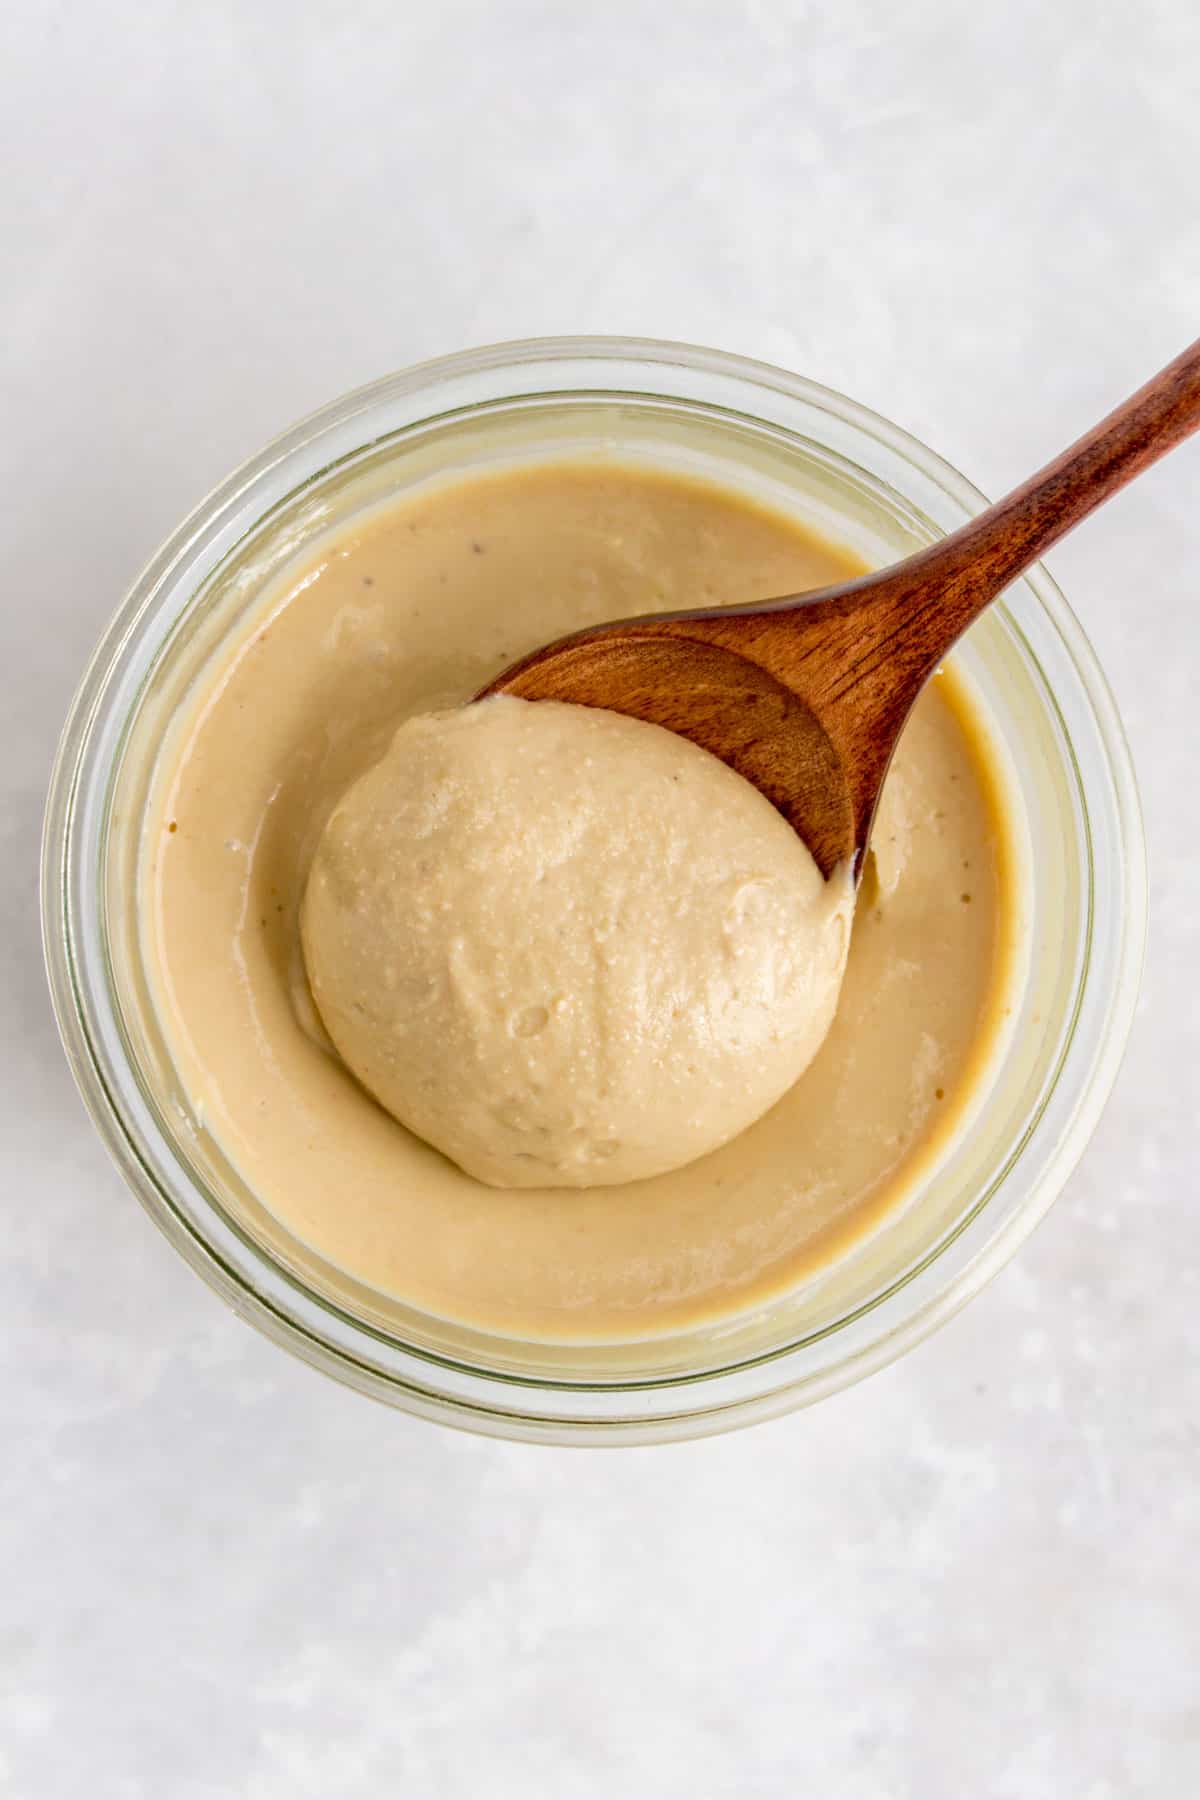 Overhead view of a wooden spoon scooped into a jar of cashew butter.